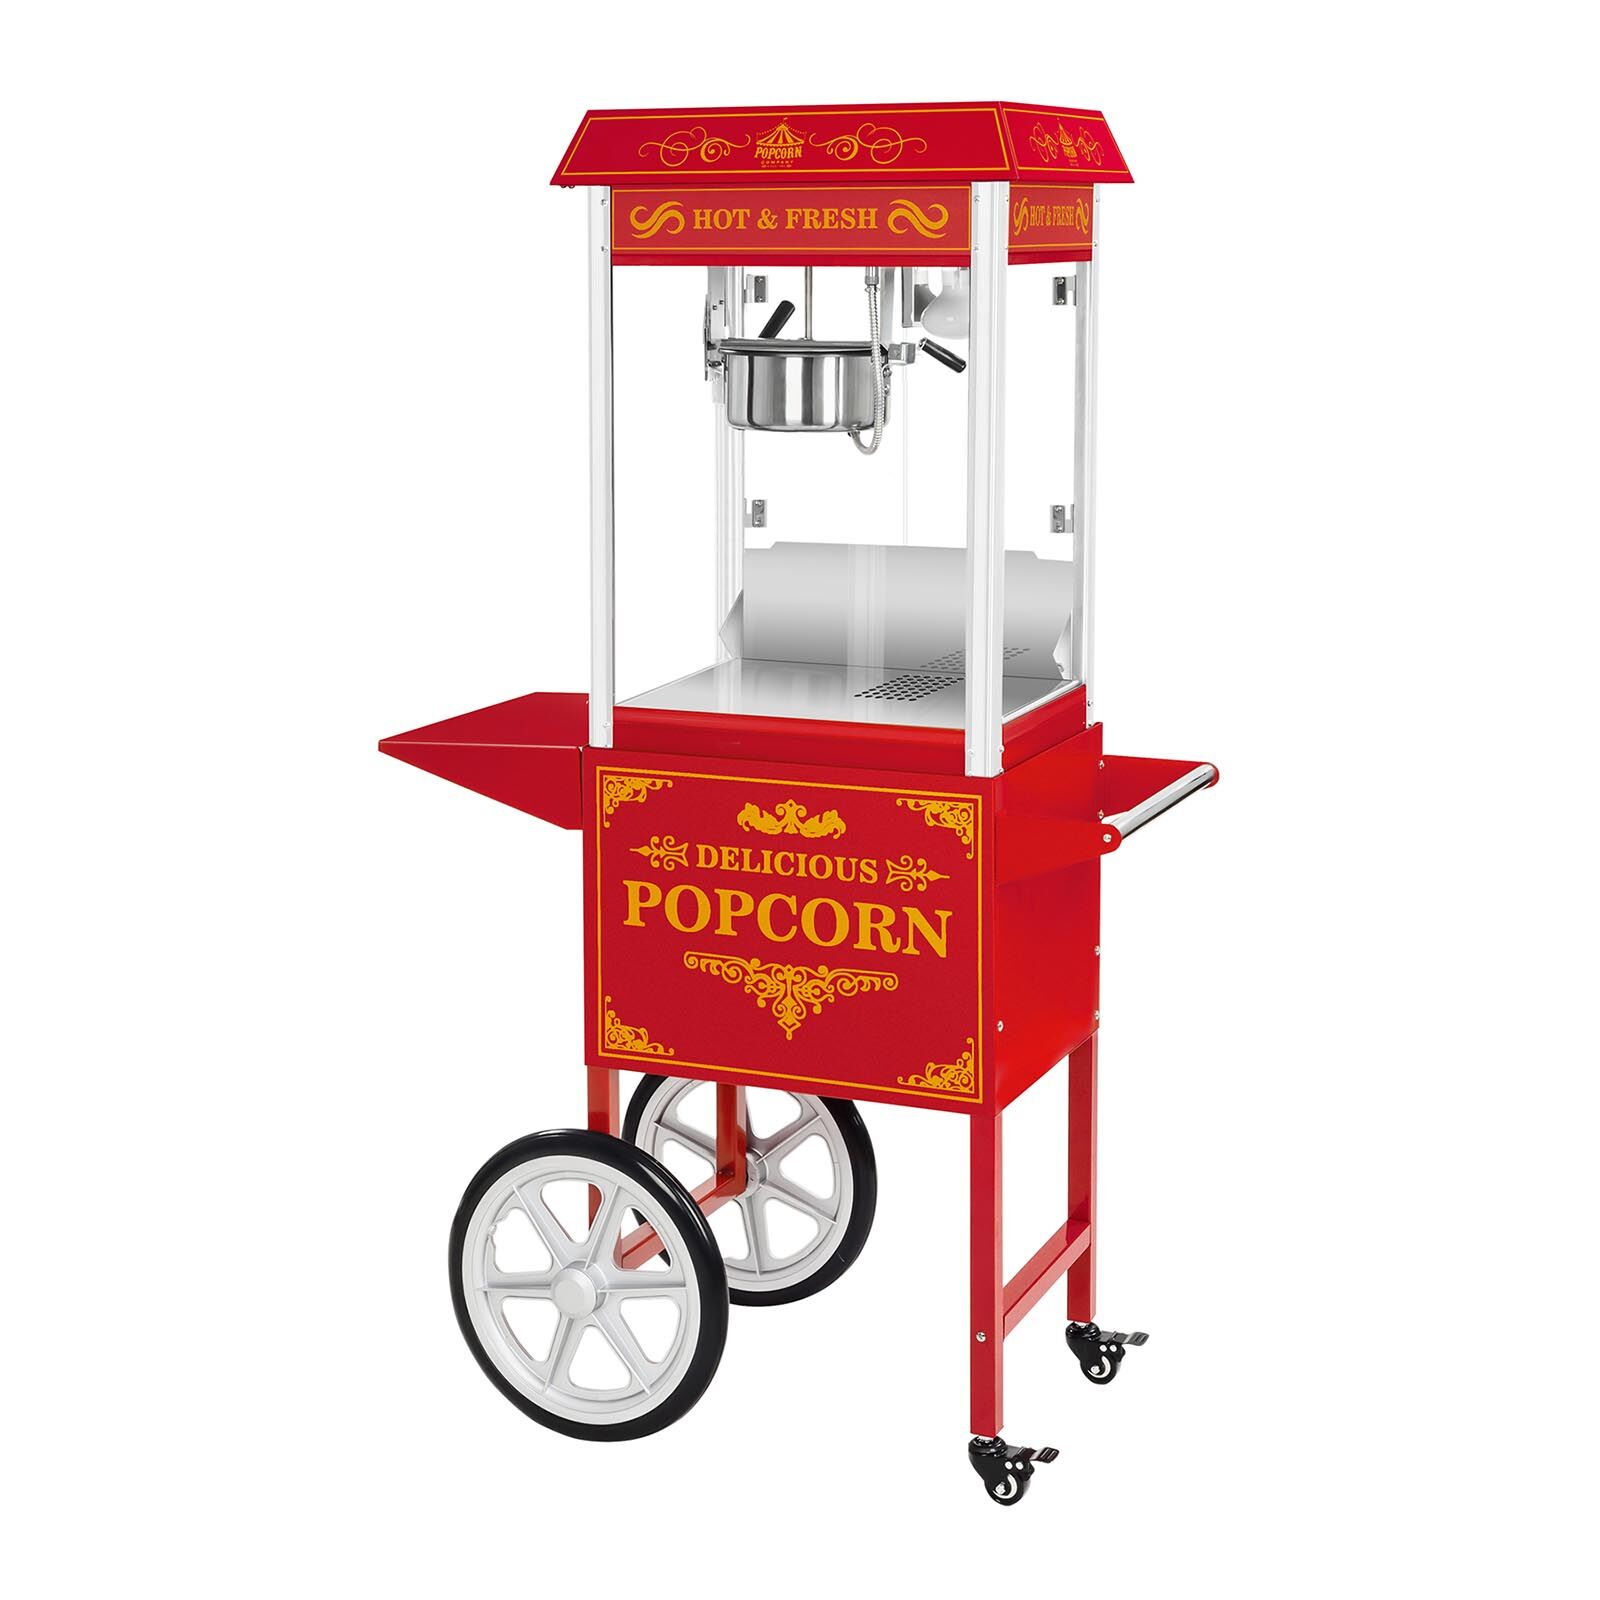 Royal Catering Popcorn Maker with trolley - Red